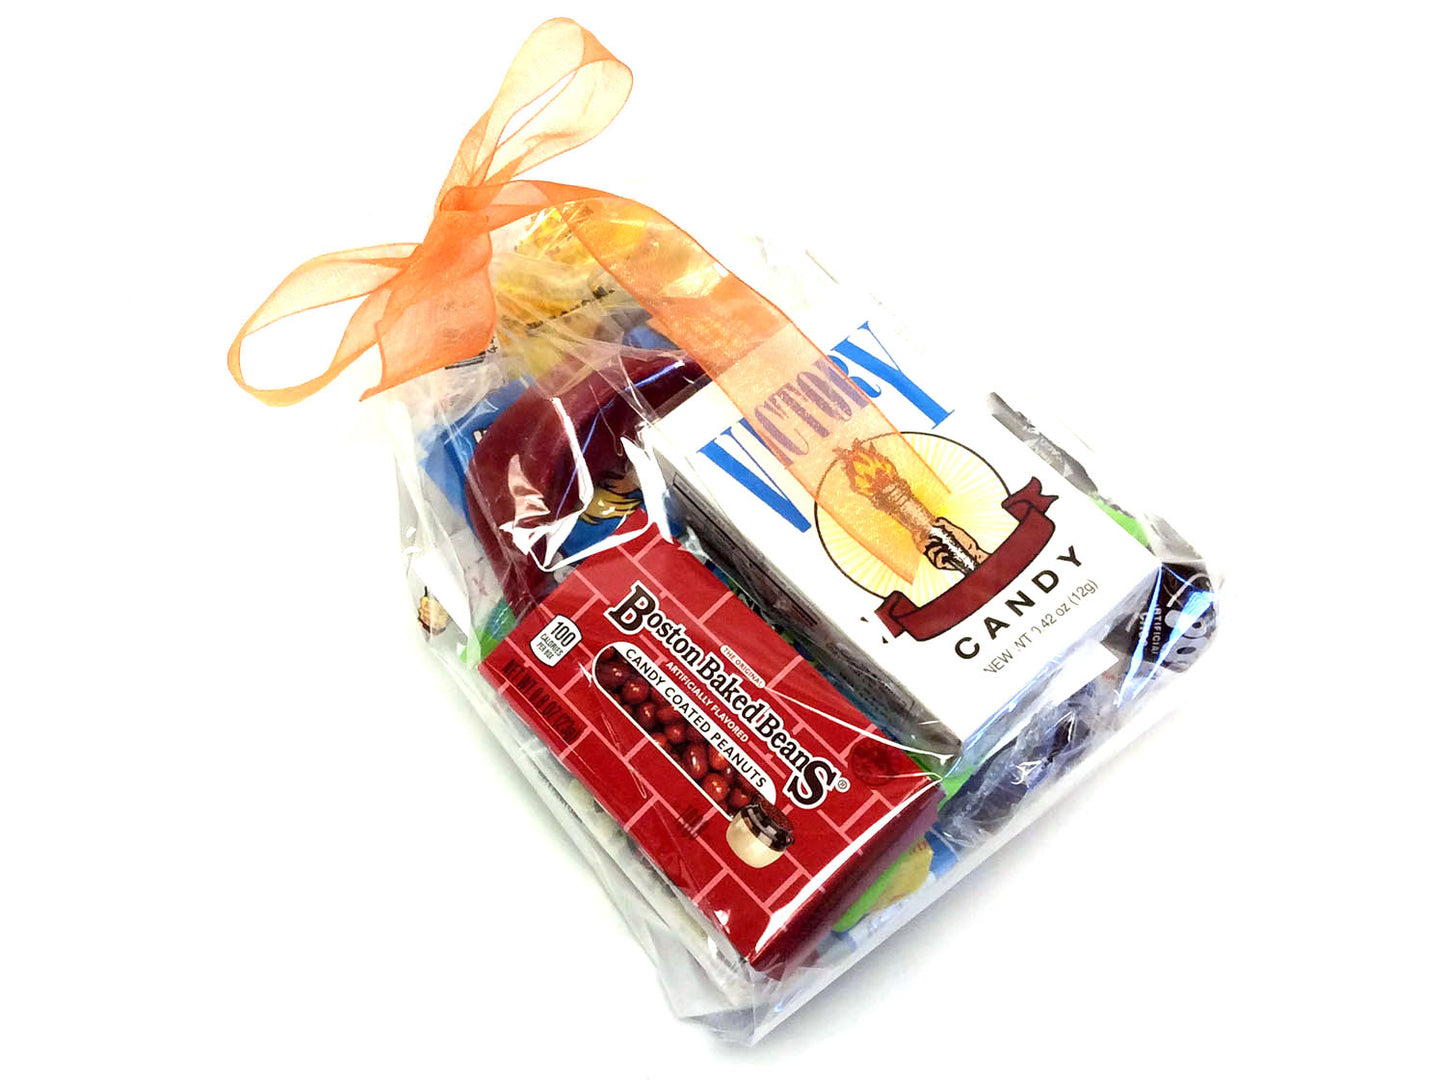 Party Favor Bag with candy - Clear Bag